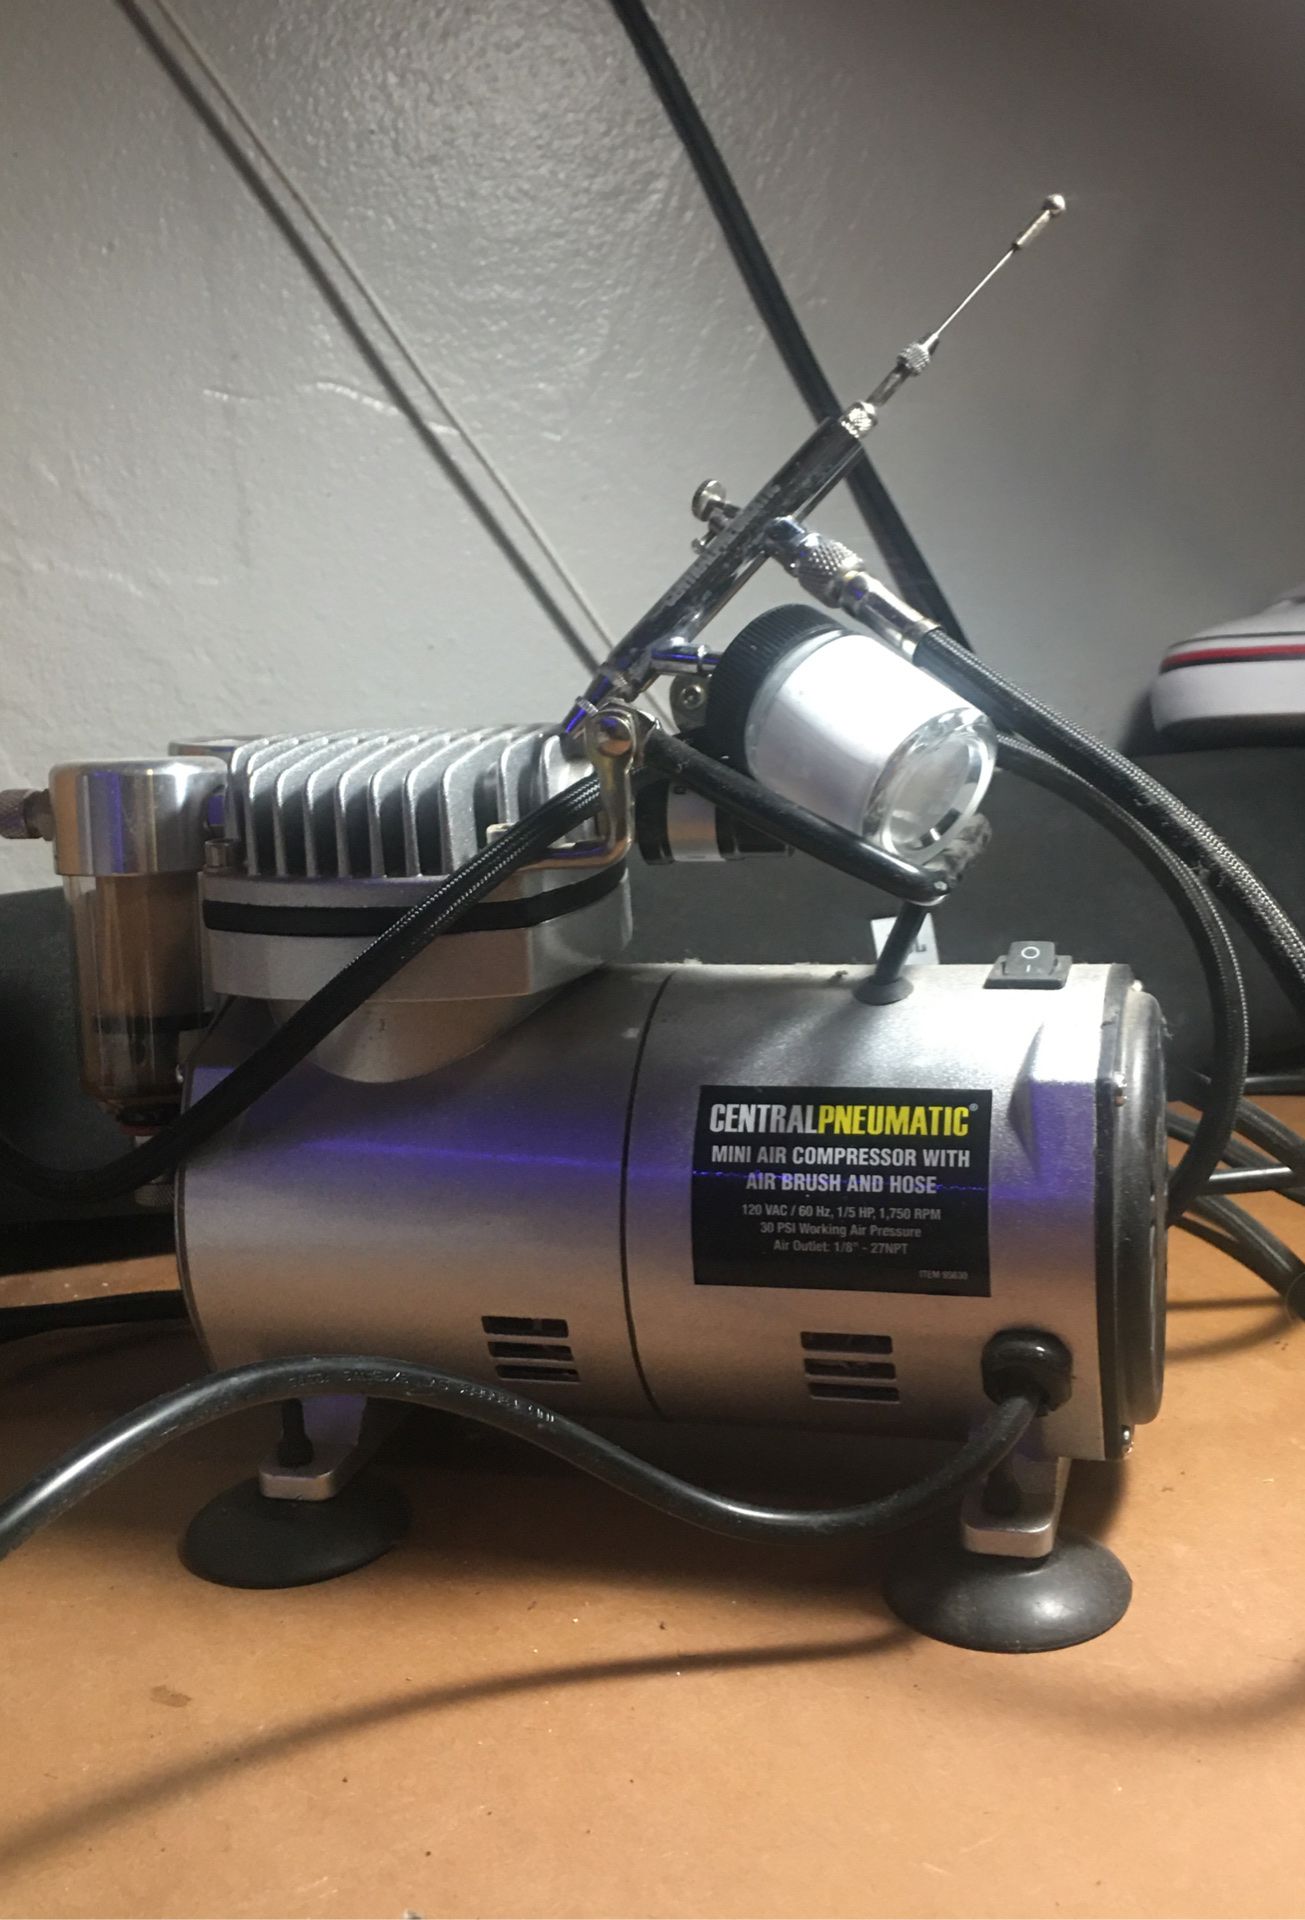 Airbrush and compressor